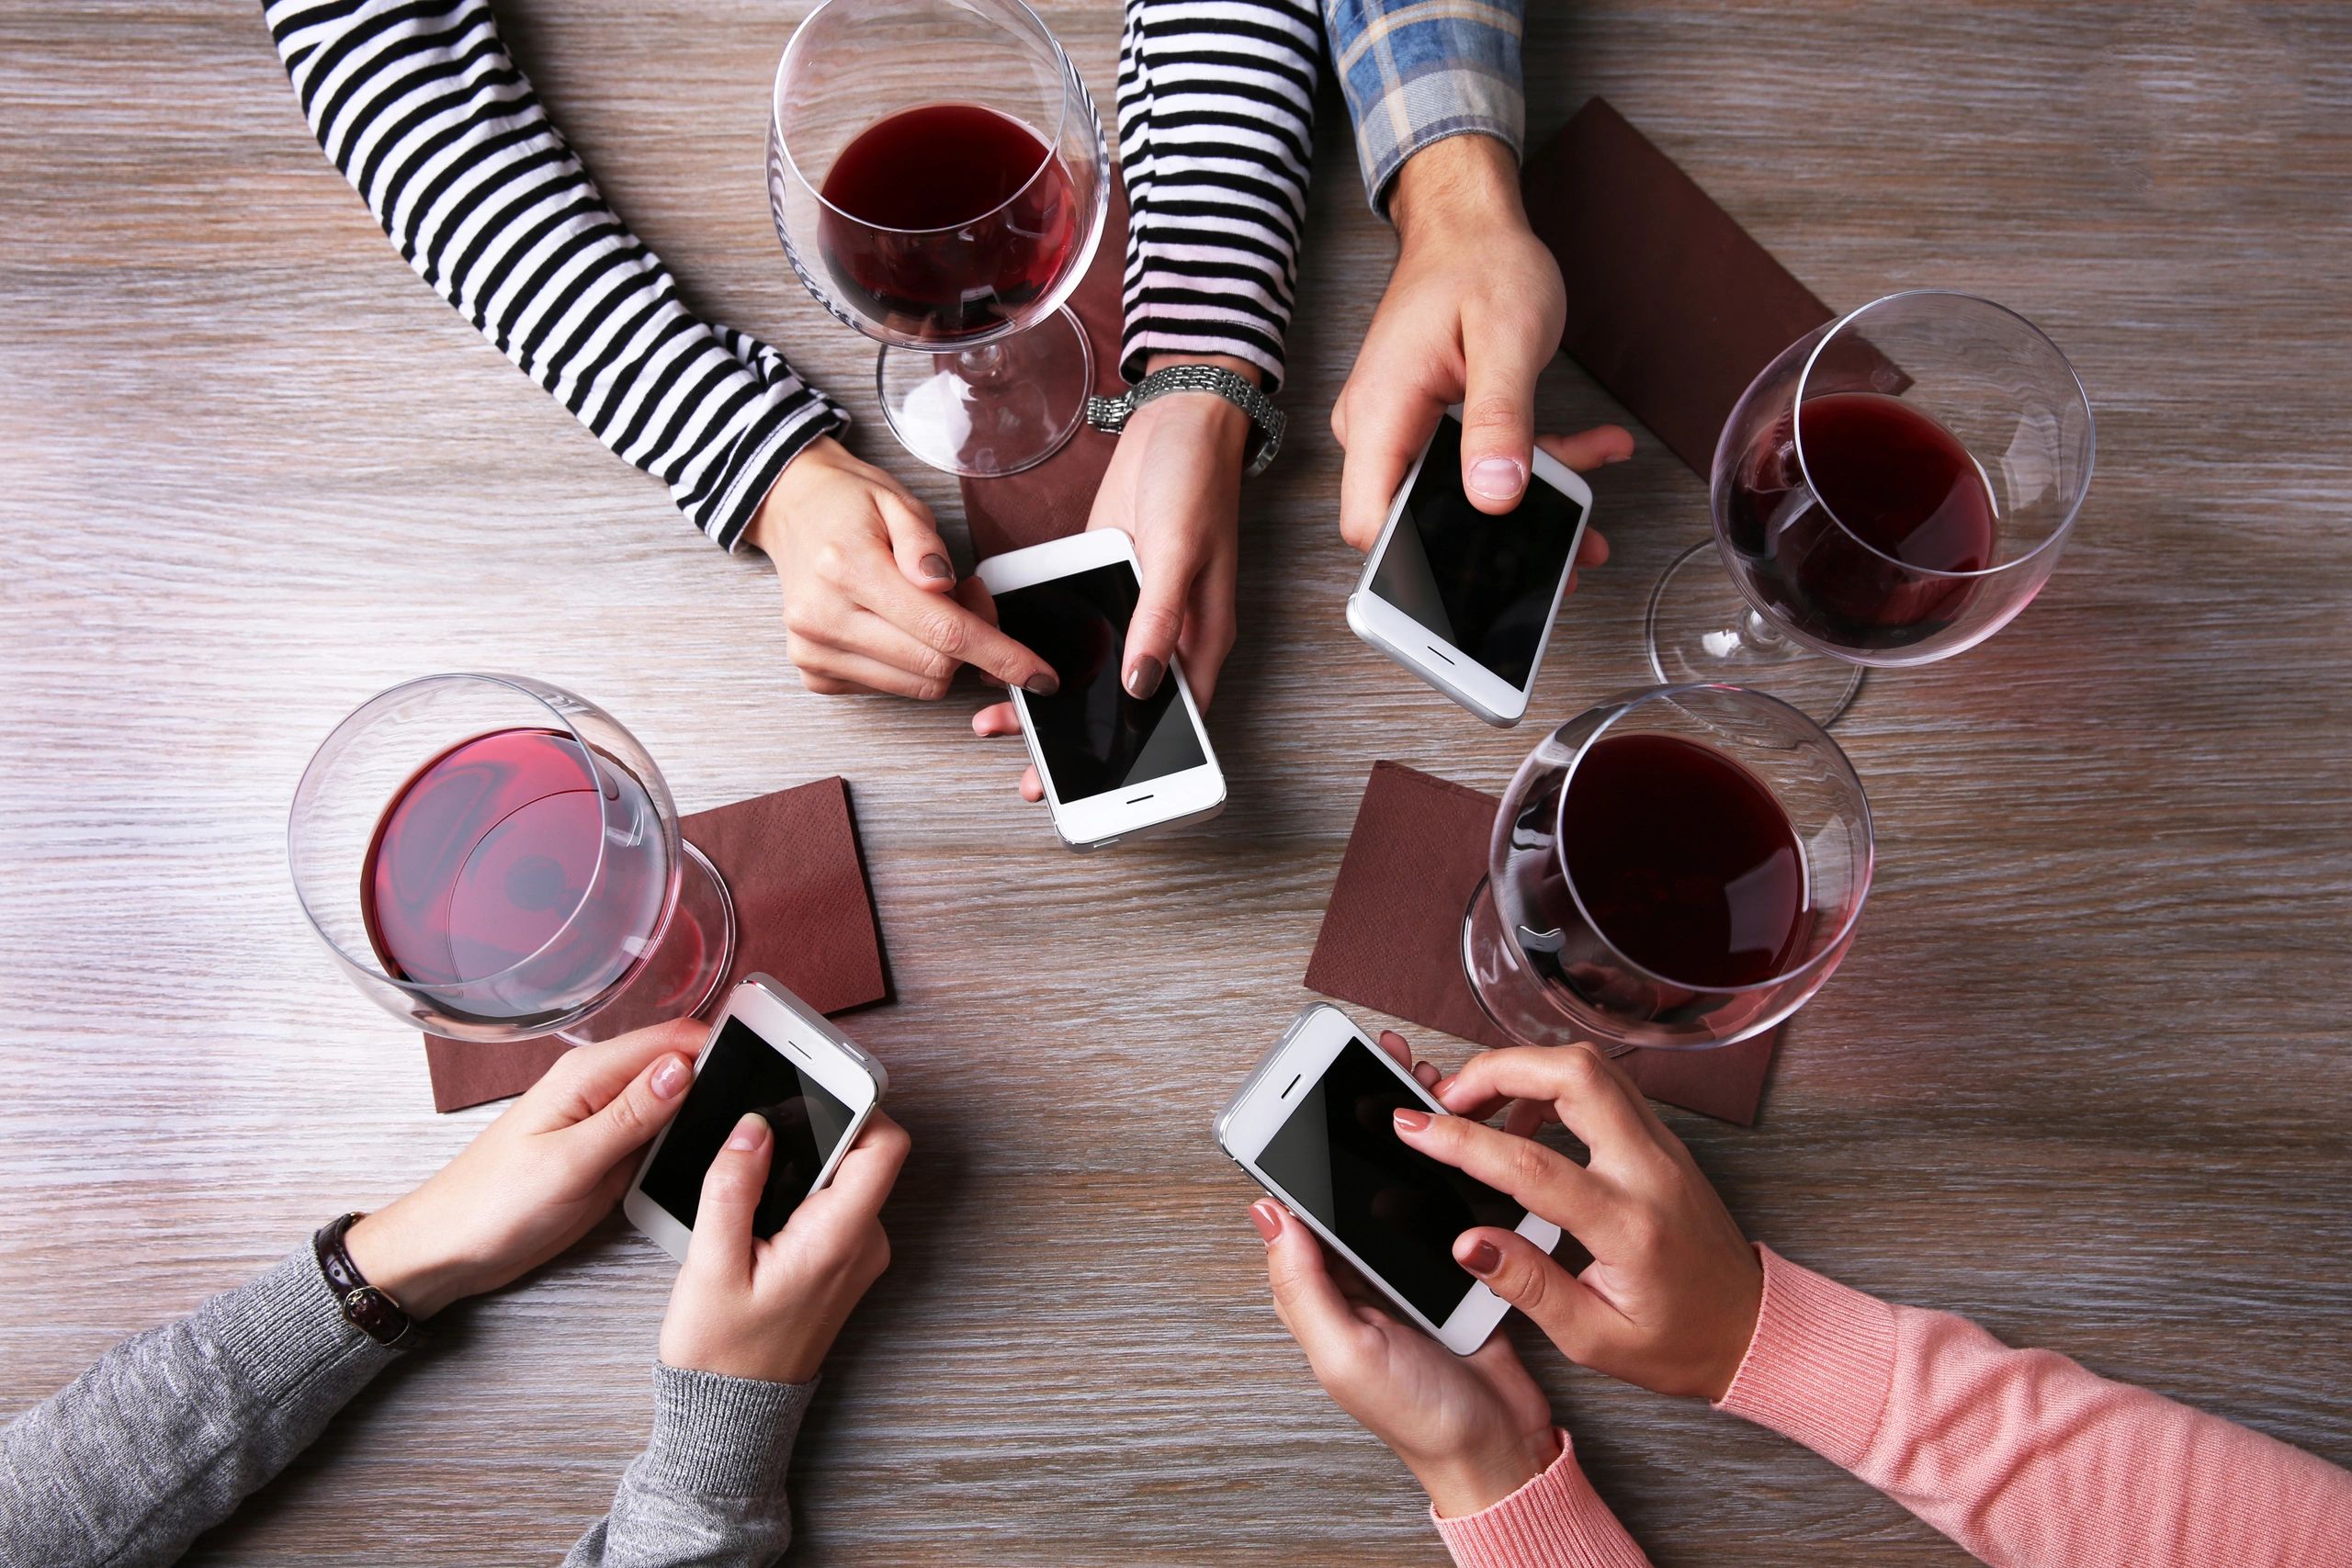 Wine glasses and cell phones